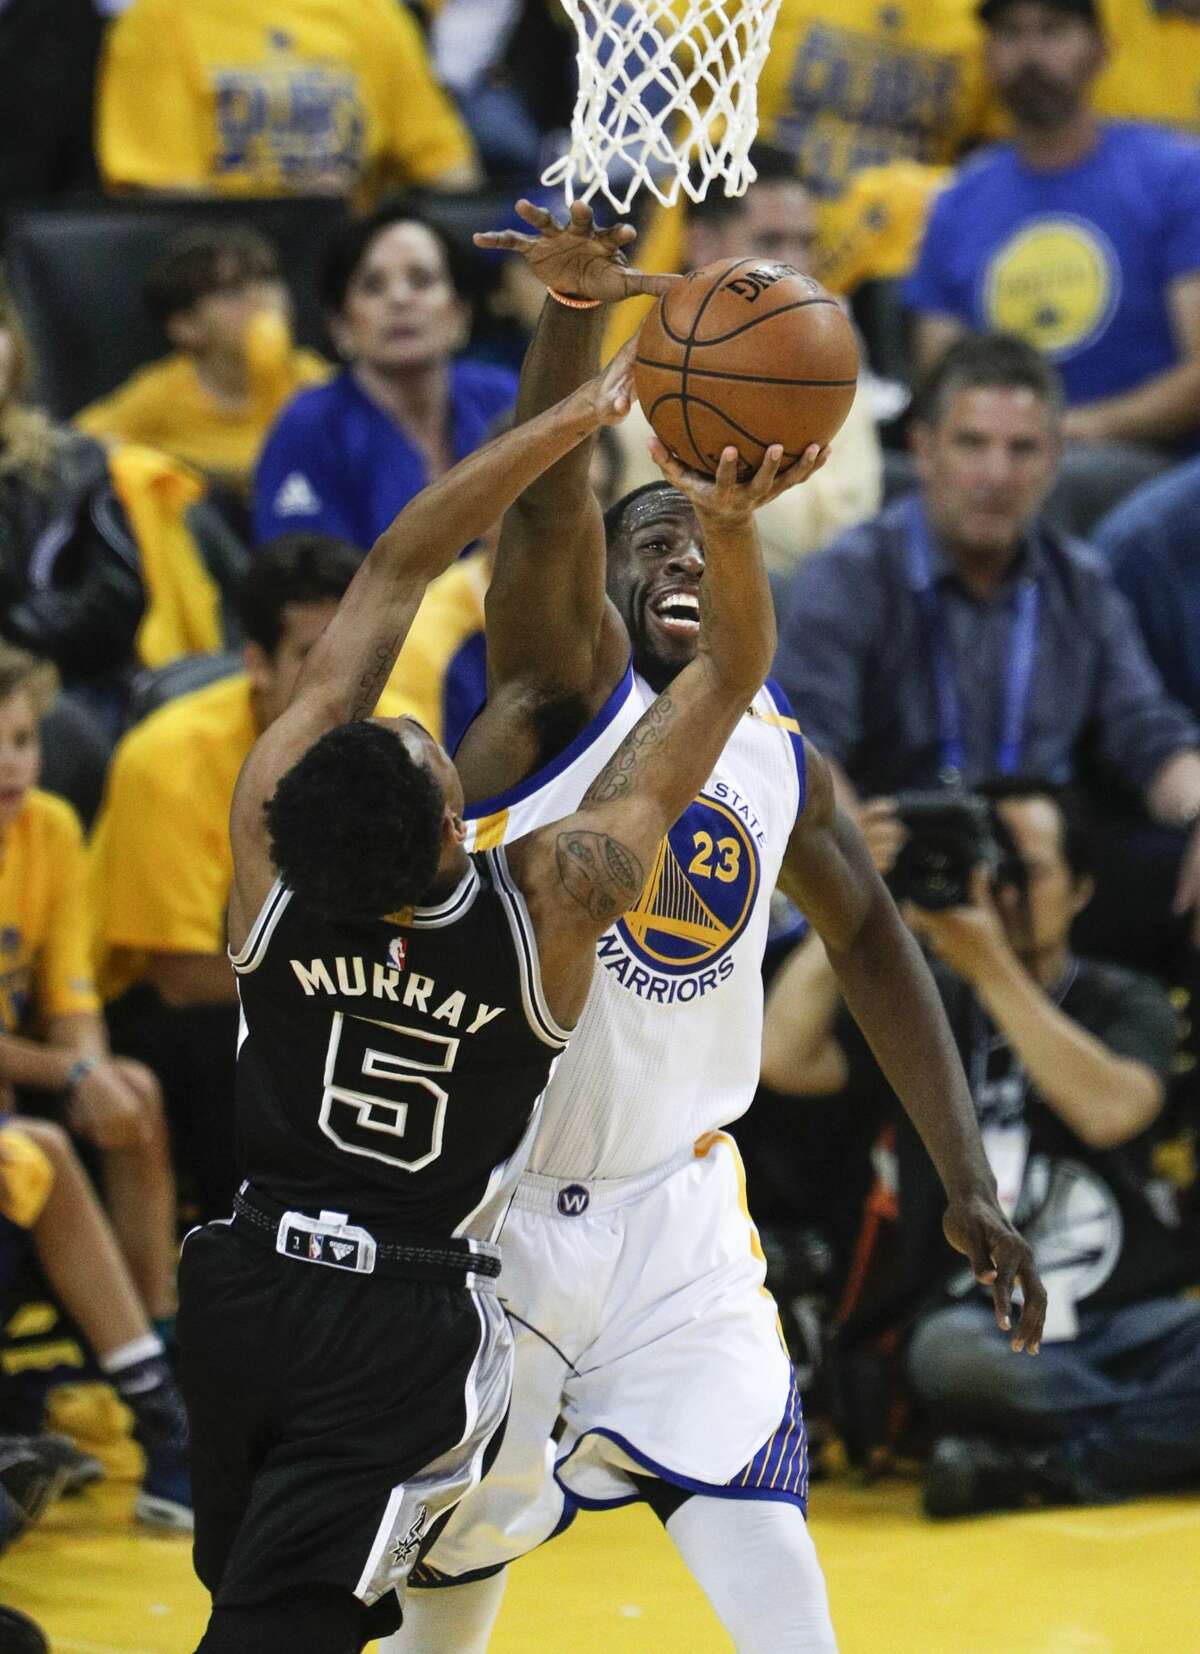 Golden State Warriors' Draymond Green blocks a San Antonio Spurs' Dejounte Murray shot in the first quarter during Game 2 of the 2017 NBA Playoffs Western Conference Finals at Oracle Arena on Tuesday, May 16, 2017 in Oakland, Calif.